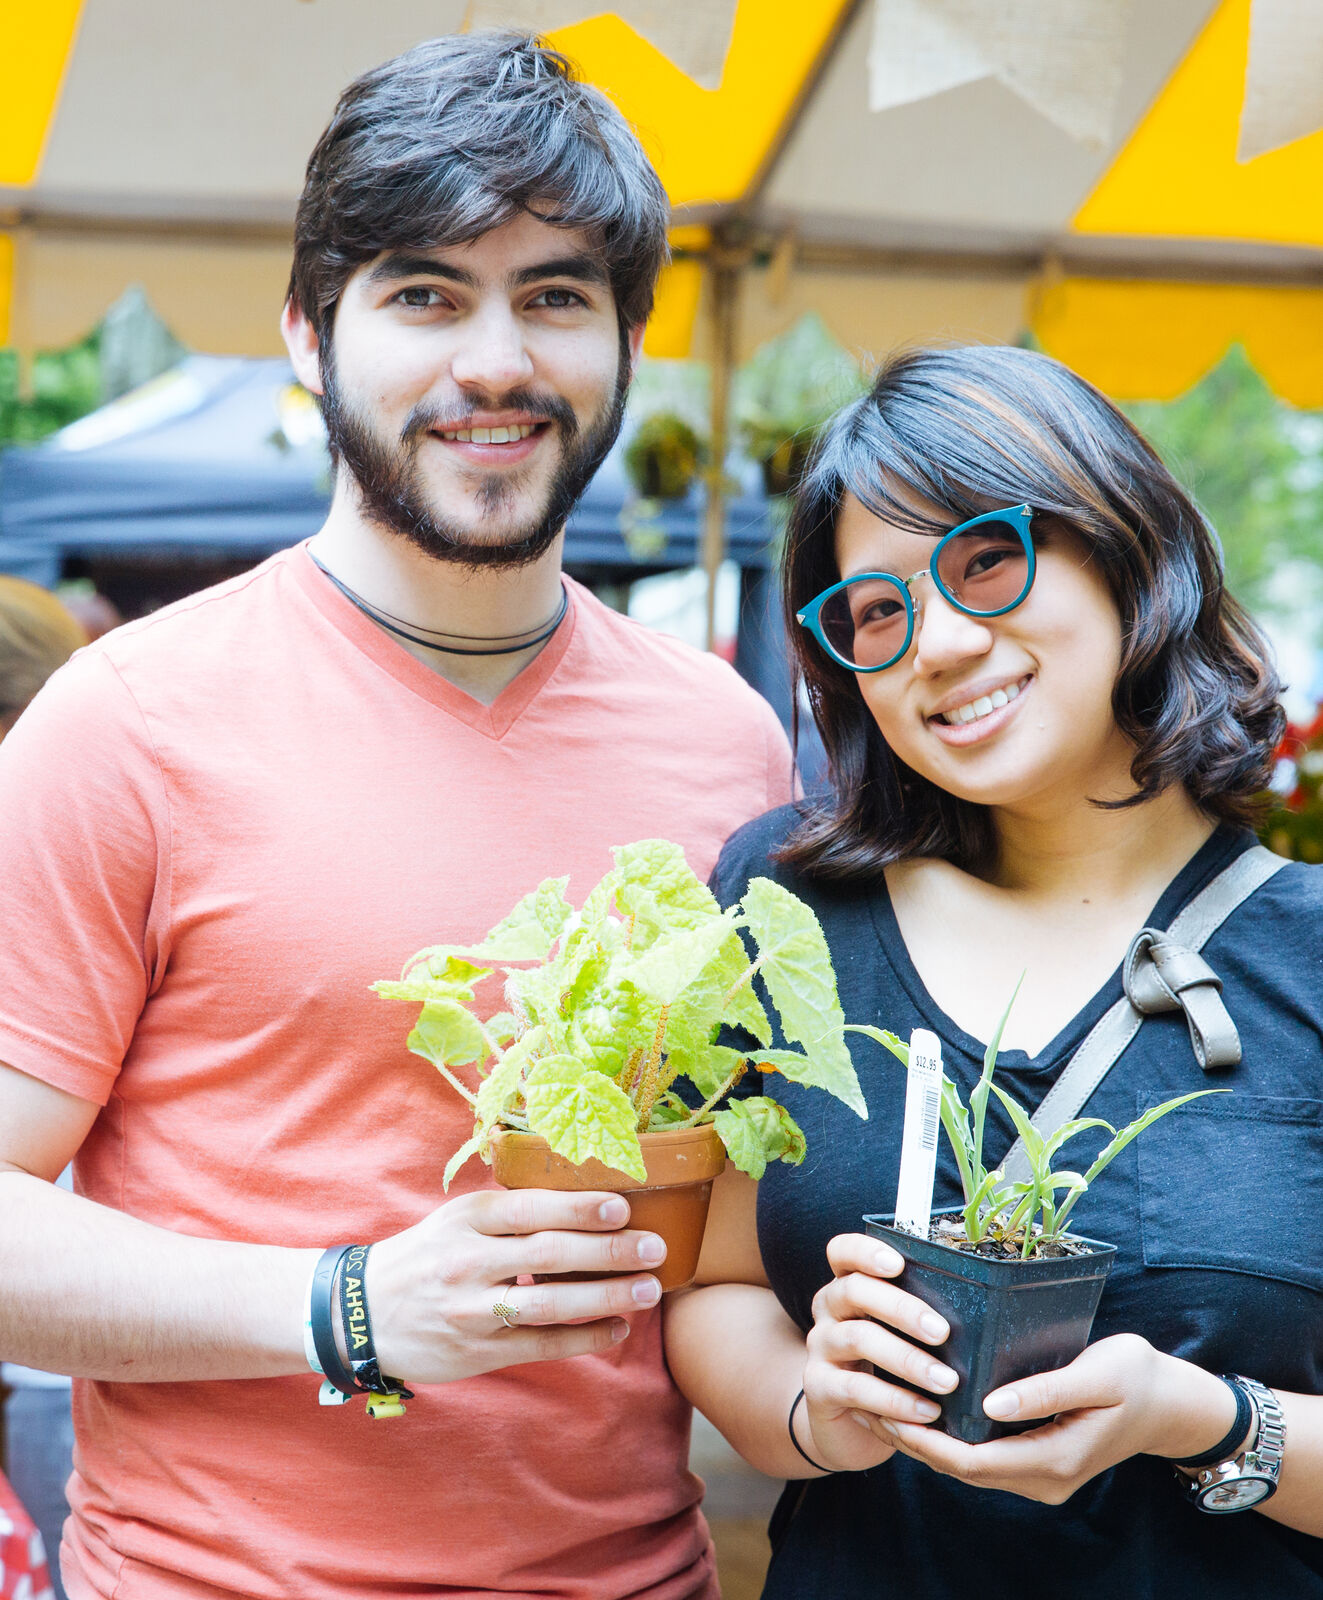 A man and woman both holding plants at a PHS plant sale.